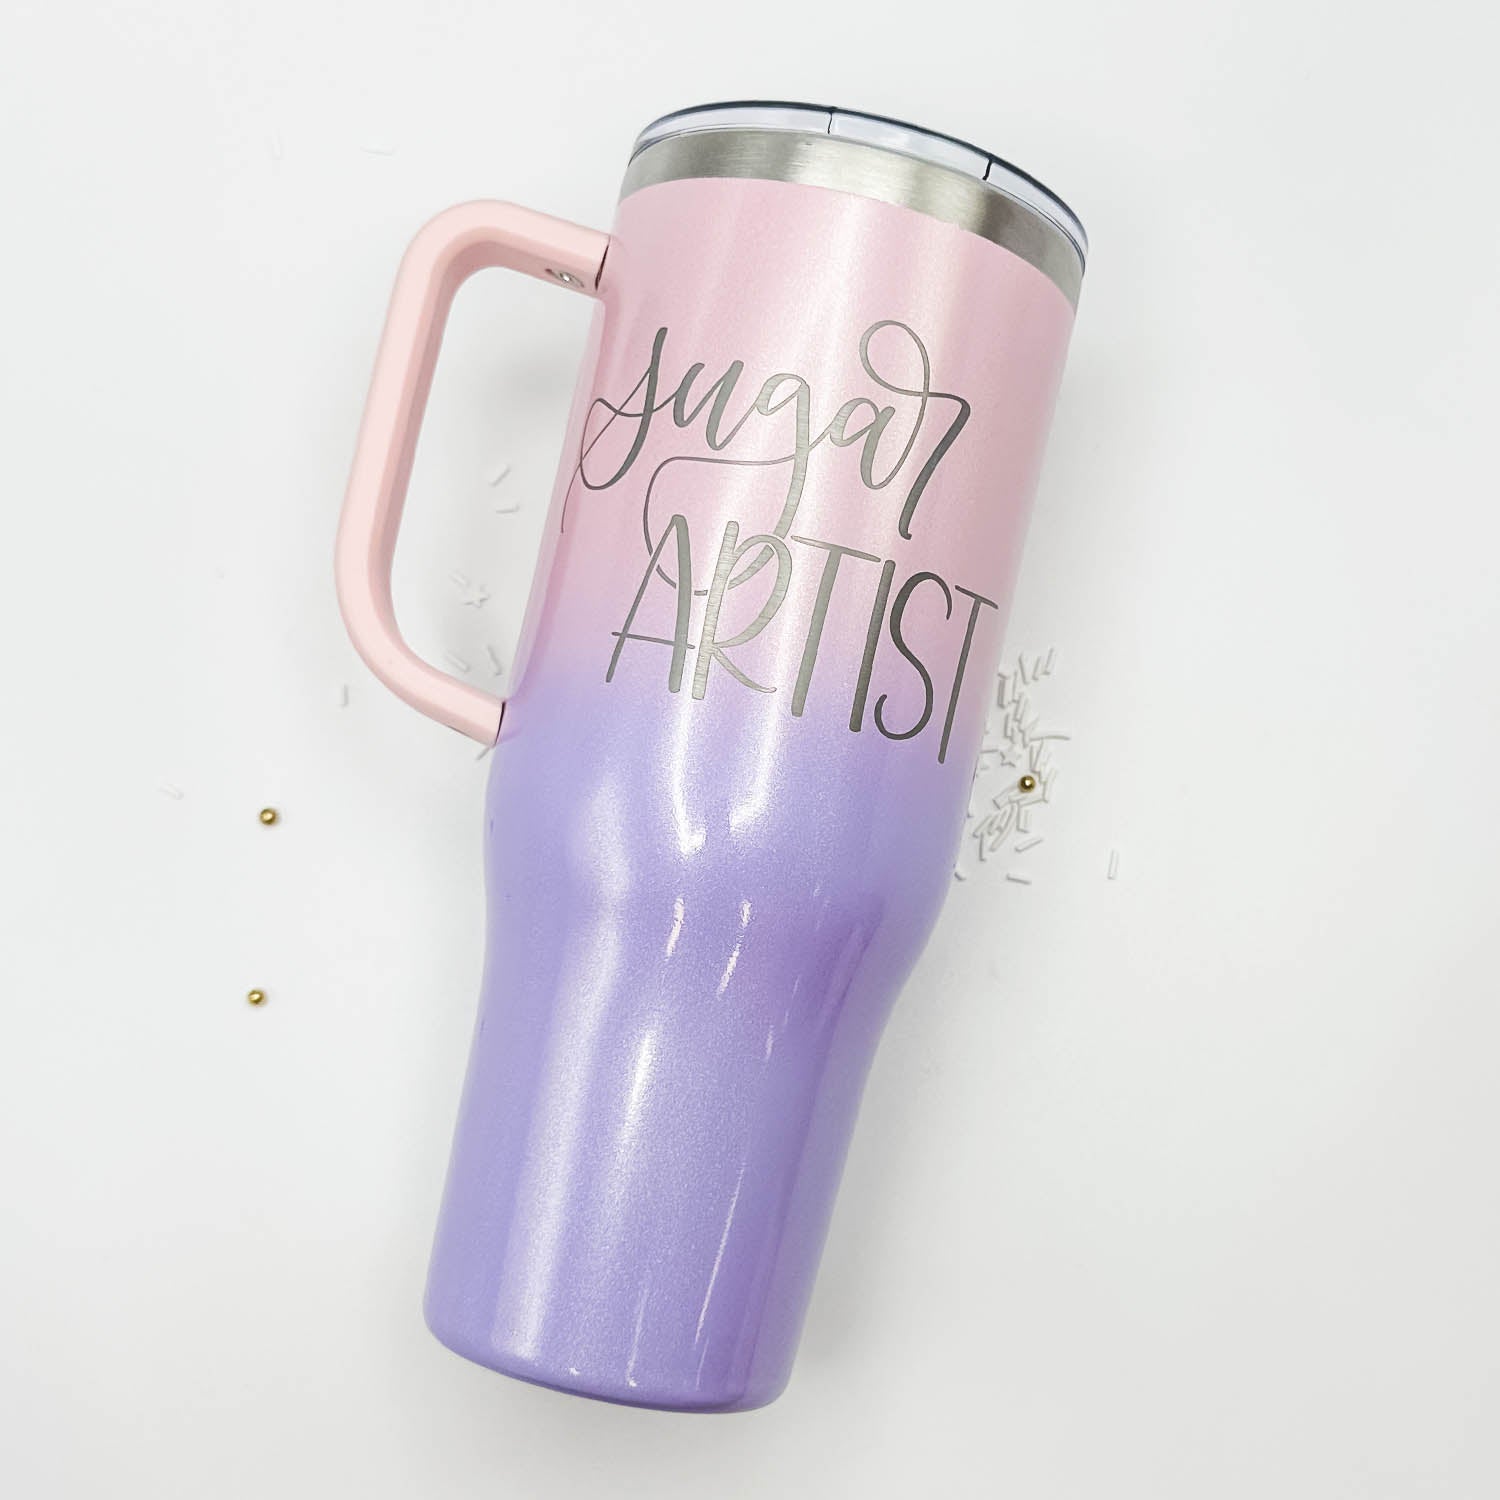 40 oz Tumbler (Multiple Colors) - Sprinkled With Pink